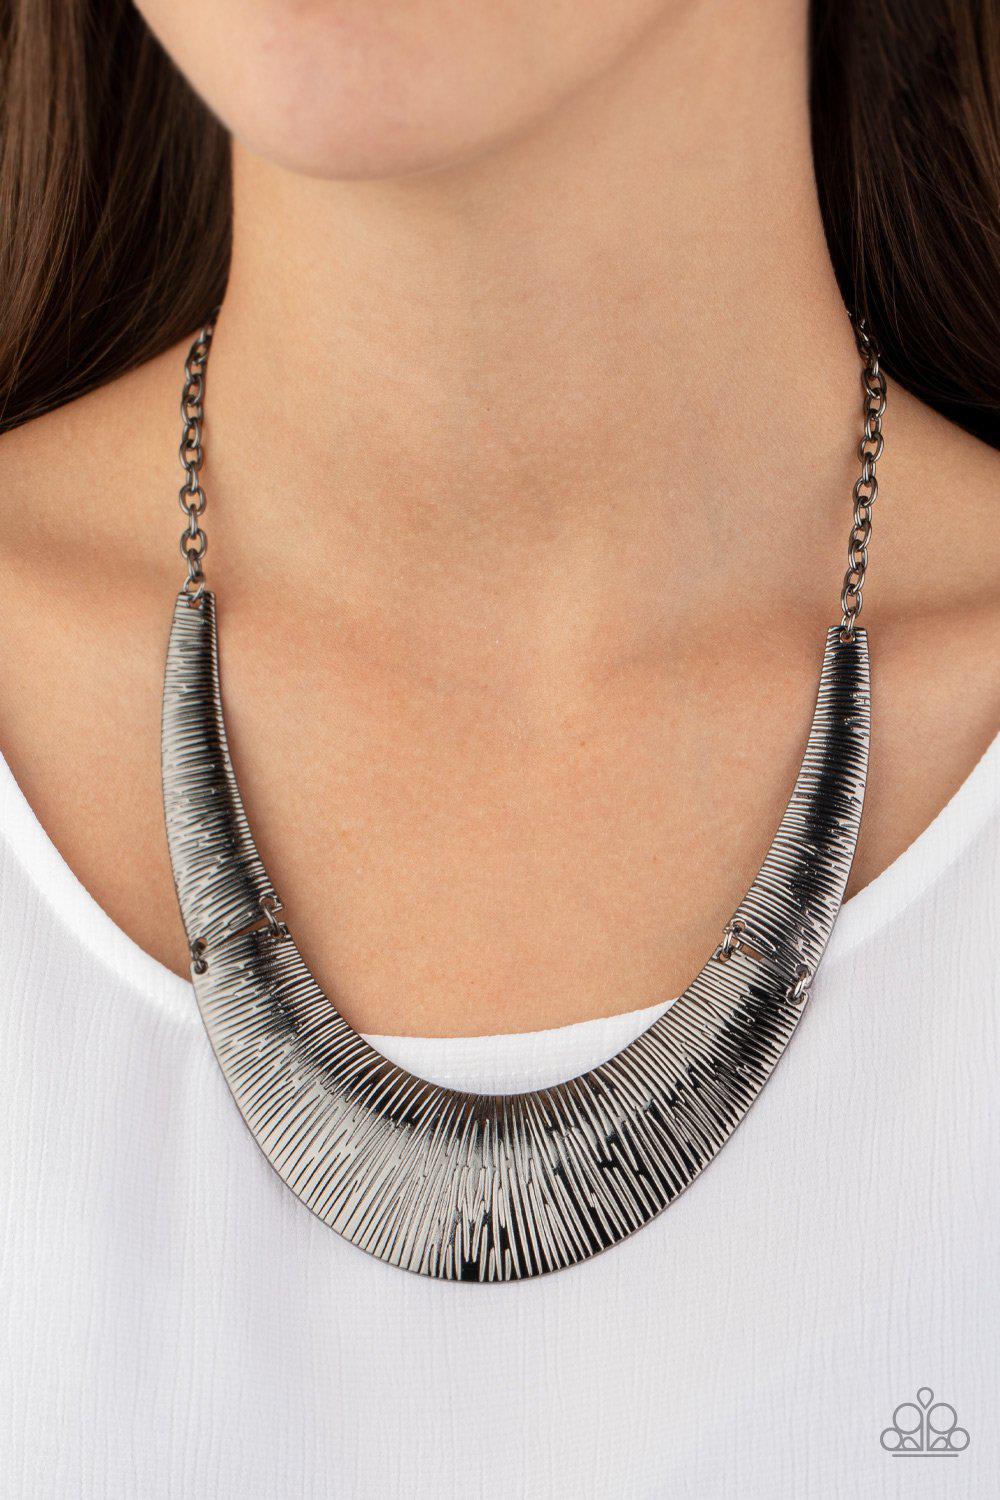 Feast or Famine Gunmetal Black Necklace - Paparazzi Accessories - model -CarasShop.com - $5 Jewelry by Cara Jewels